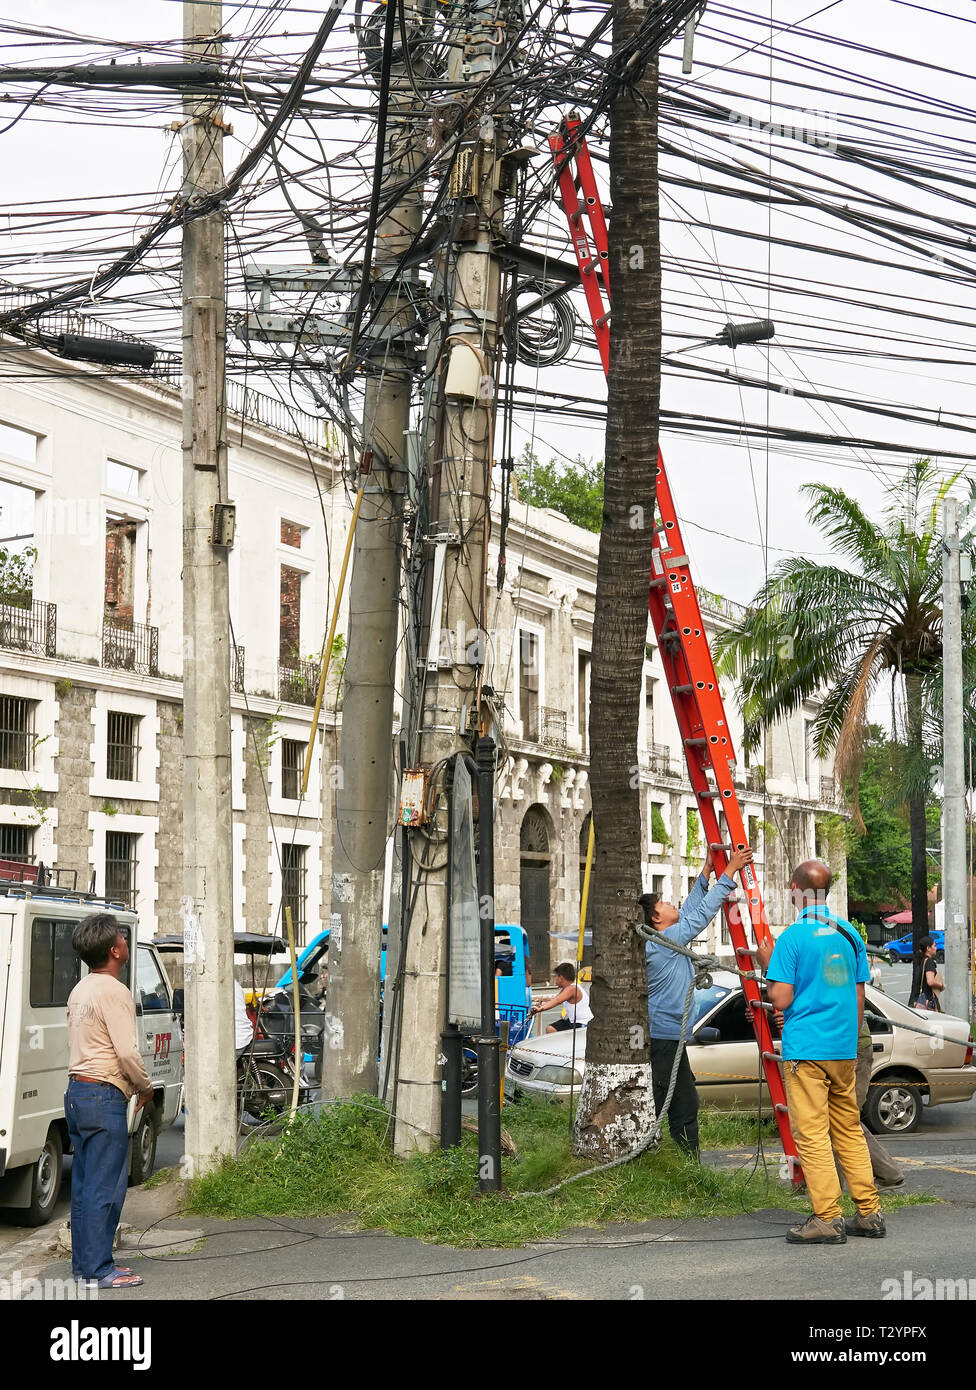 Manila, Philippines: A group of men fixing cables on a post with the help of a ladder in the historical city of Intramuros Stock Photo